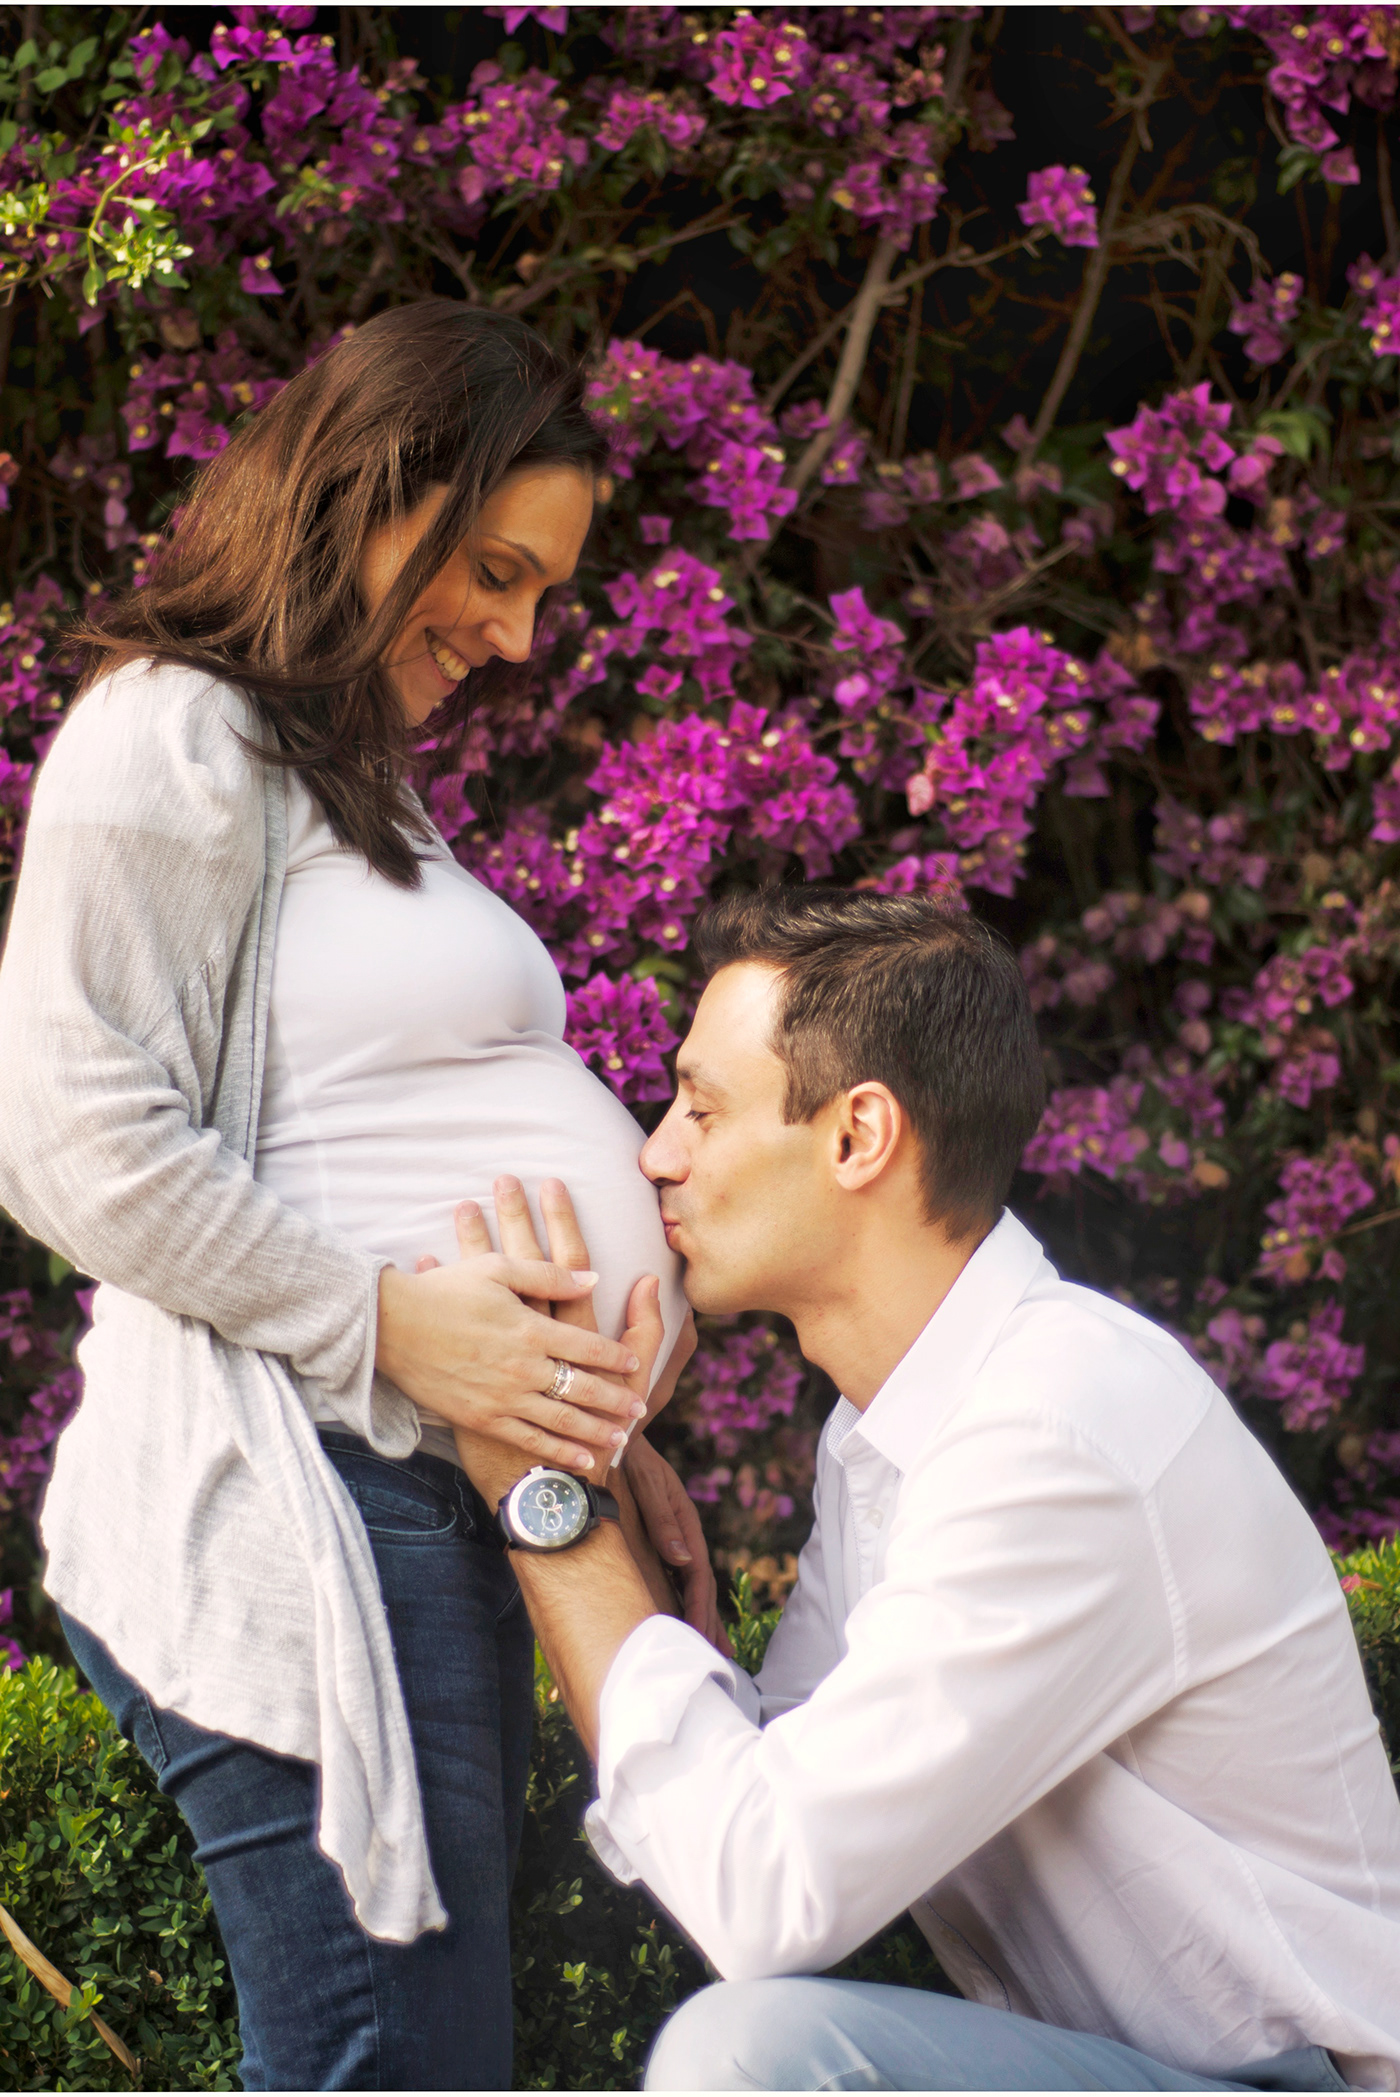 #family #photography #pregnant #childrens